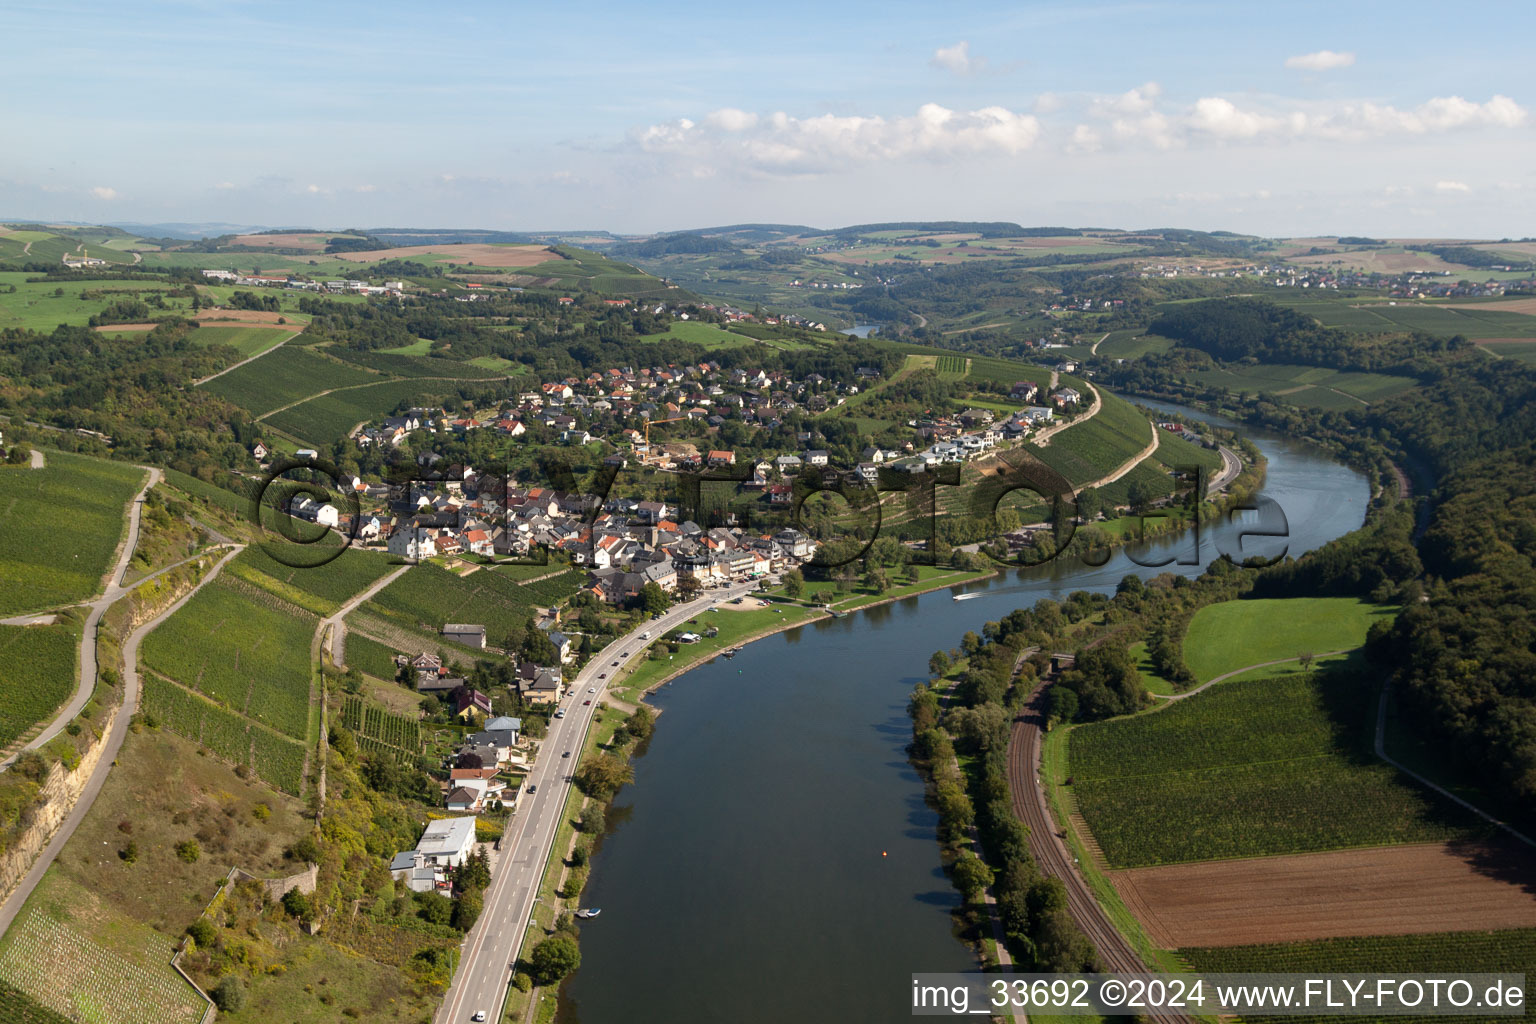 Village on the river bank areas of the river Mosel in Greiweldeng in Distrikt Greiwemaacher, Luxembourg